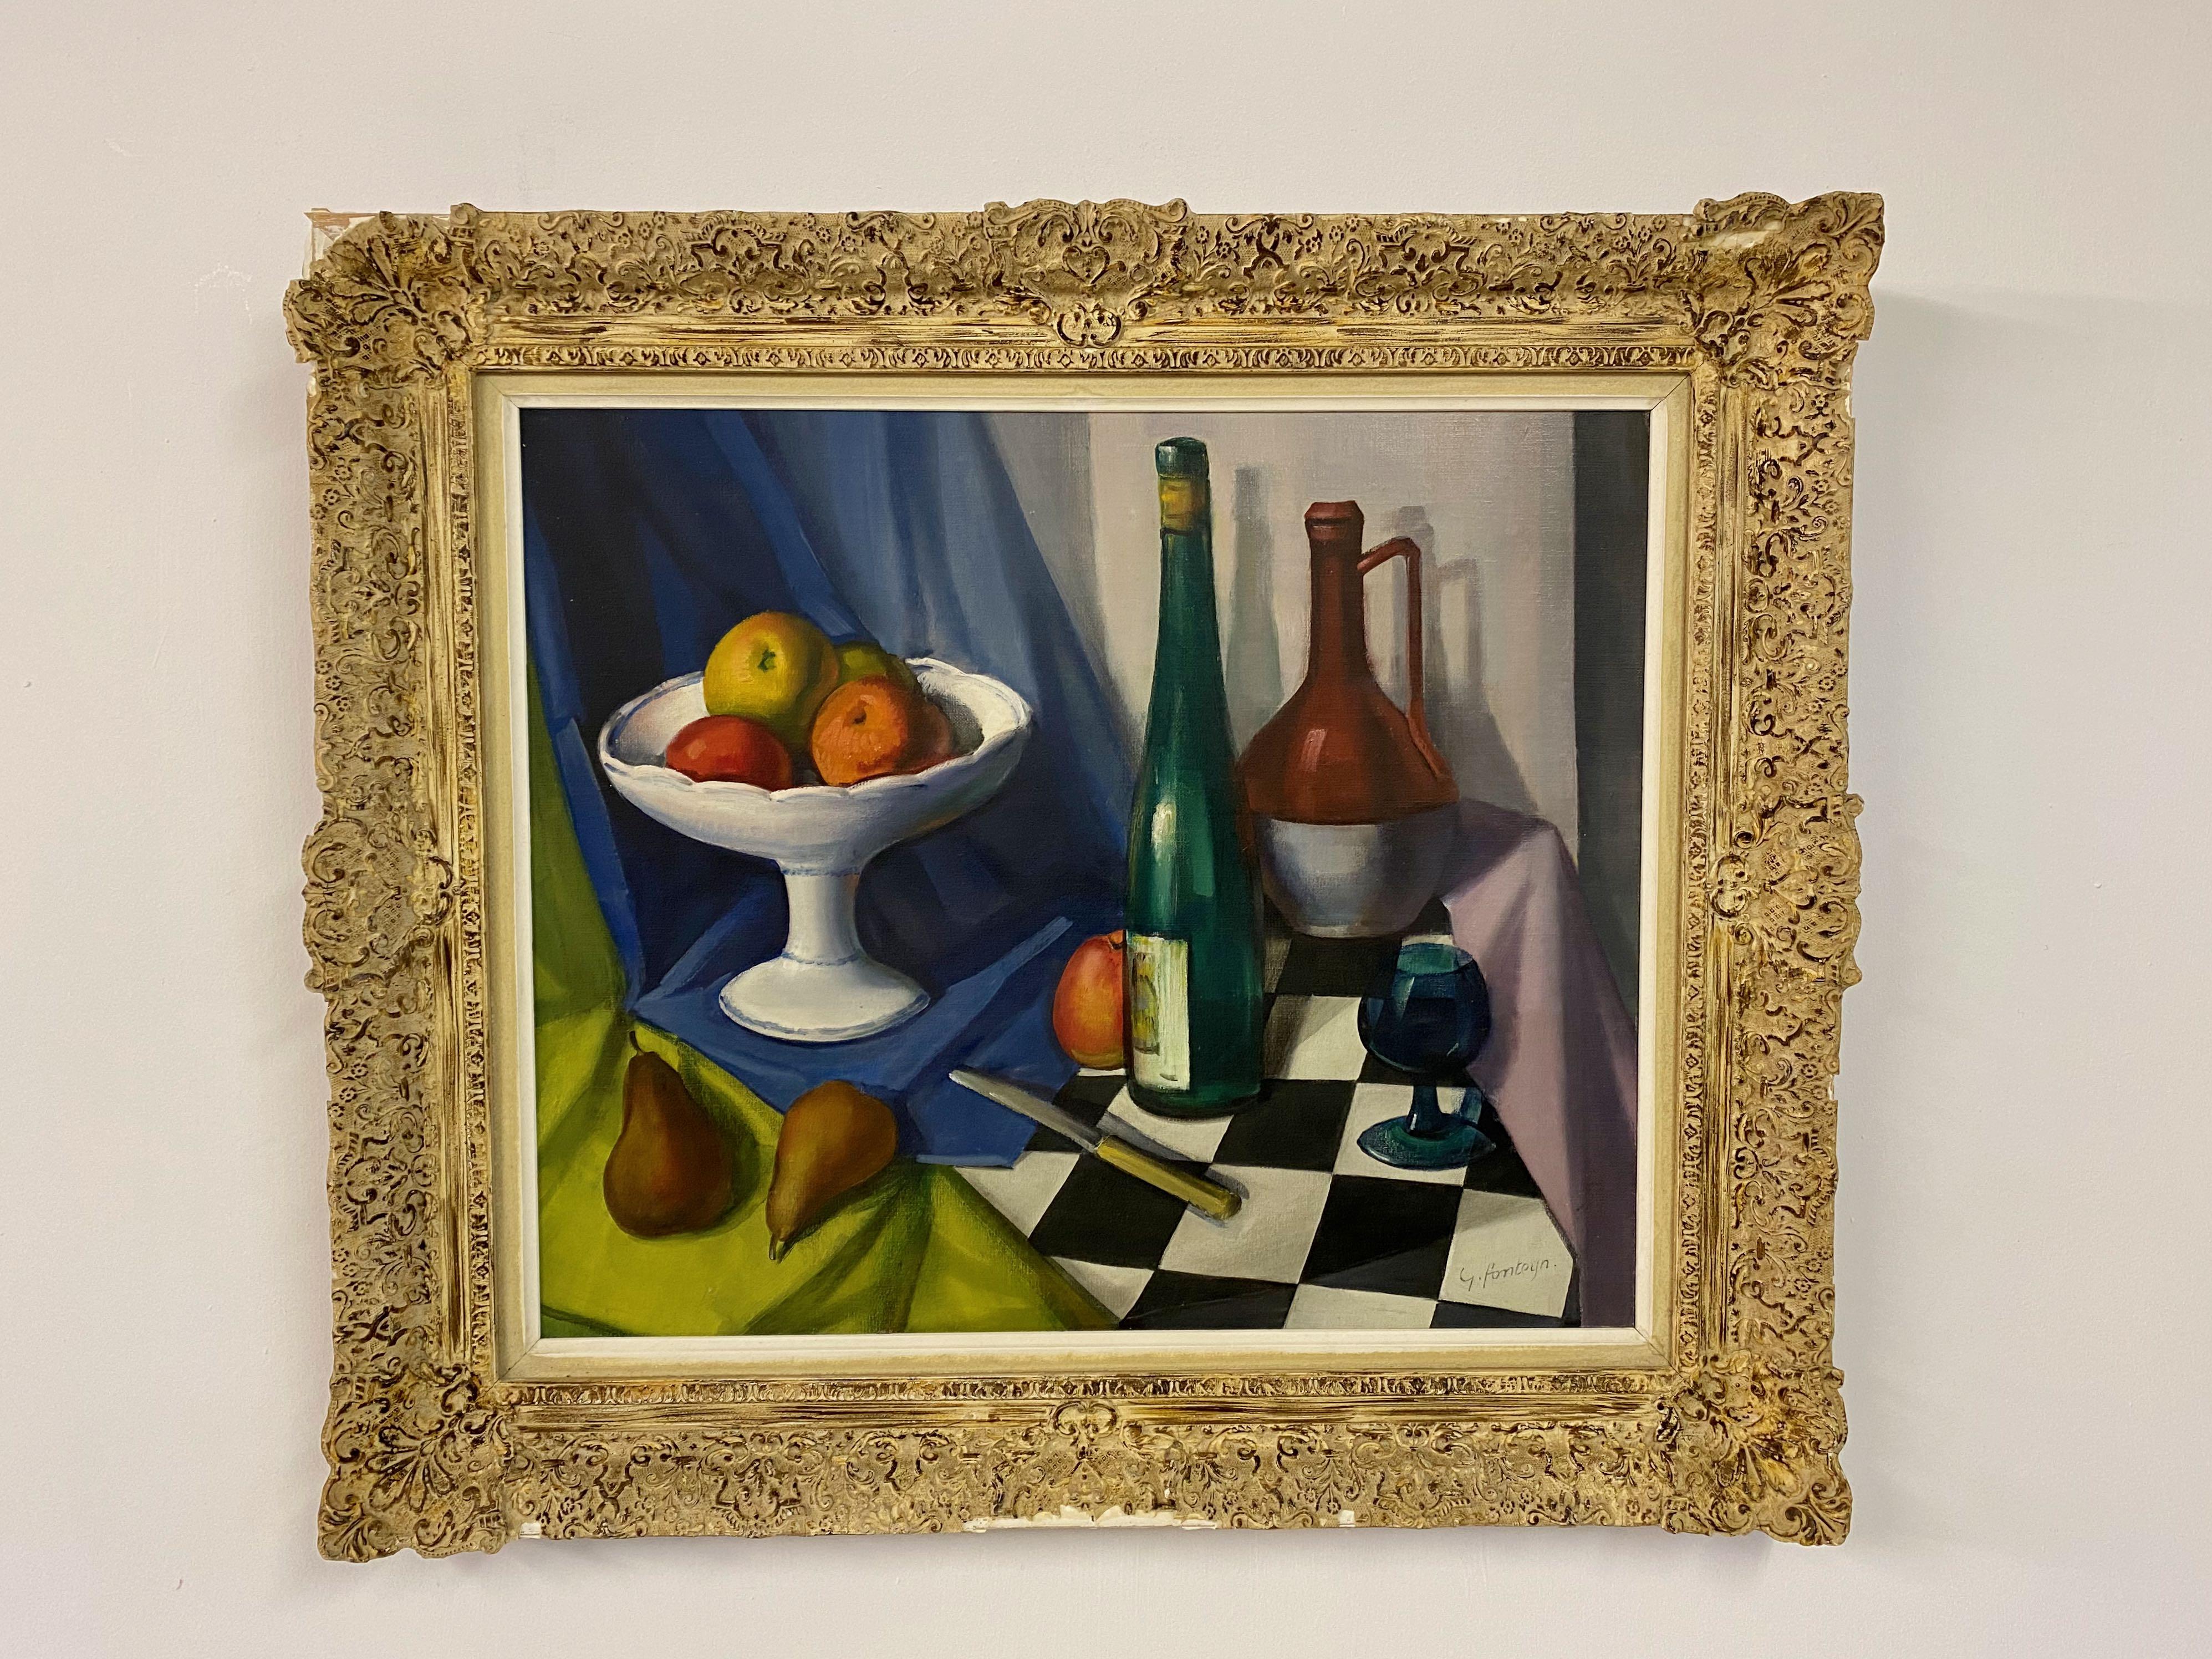 Still life 

Oil on canvas

Ornate frame with some damage to carving

Belgian mid century.